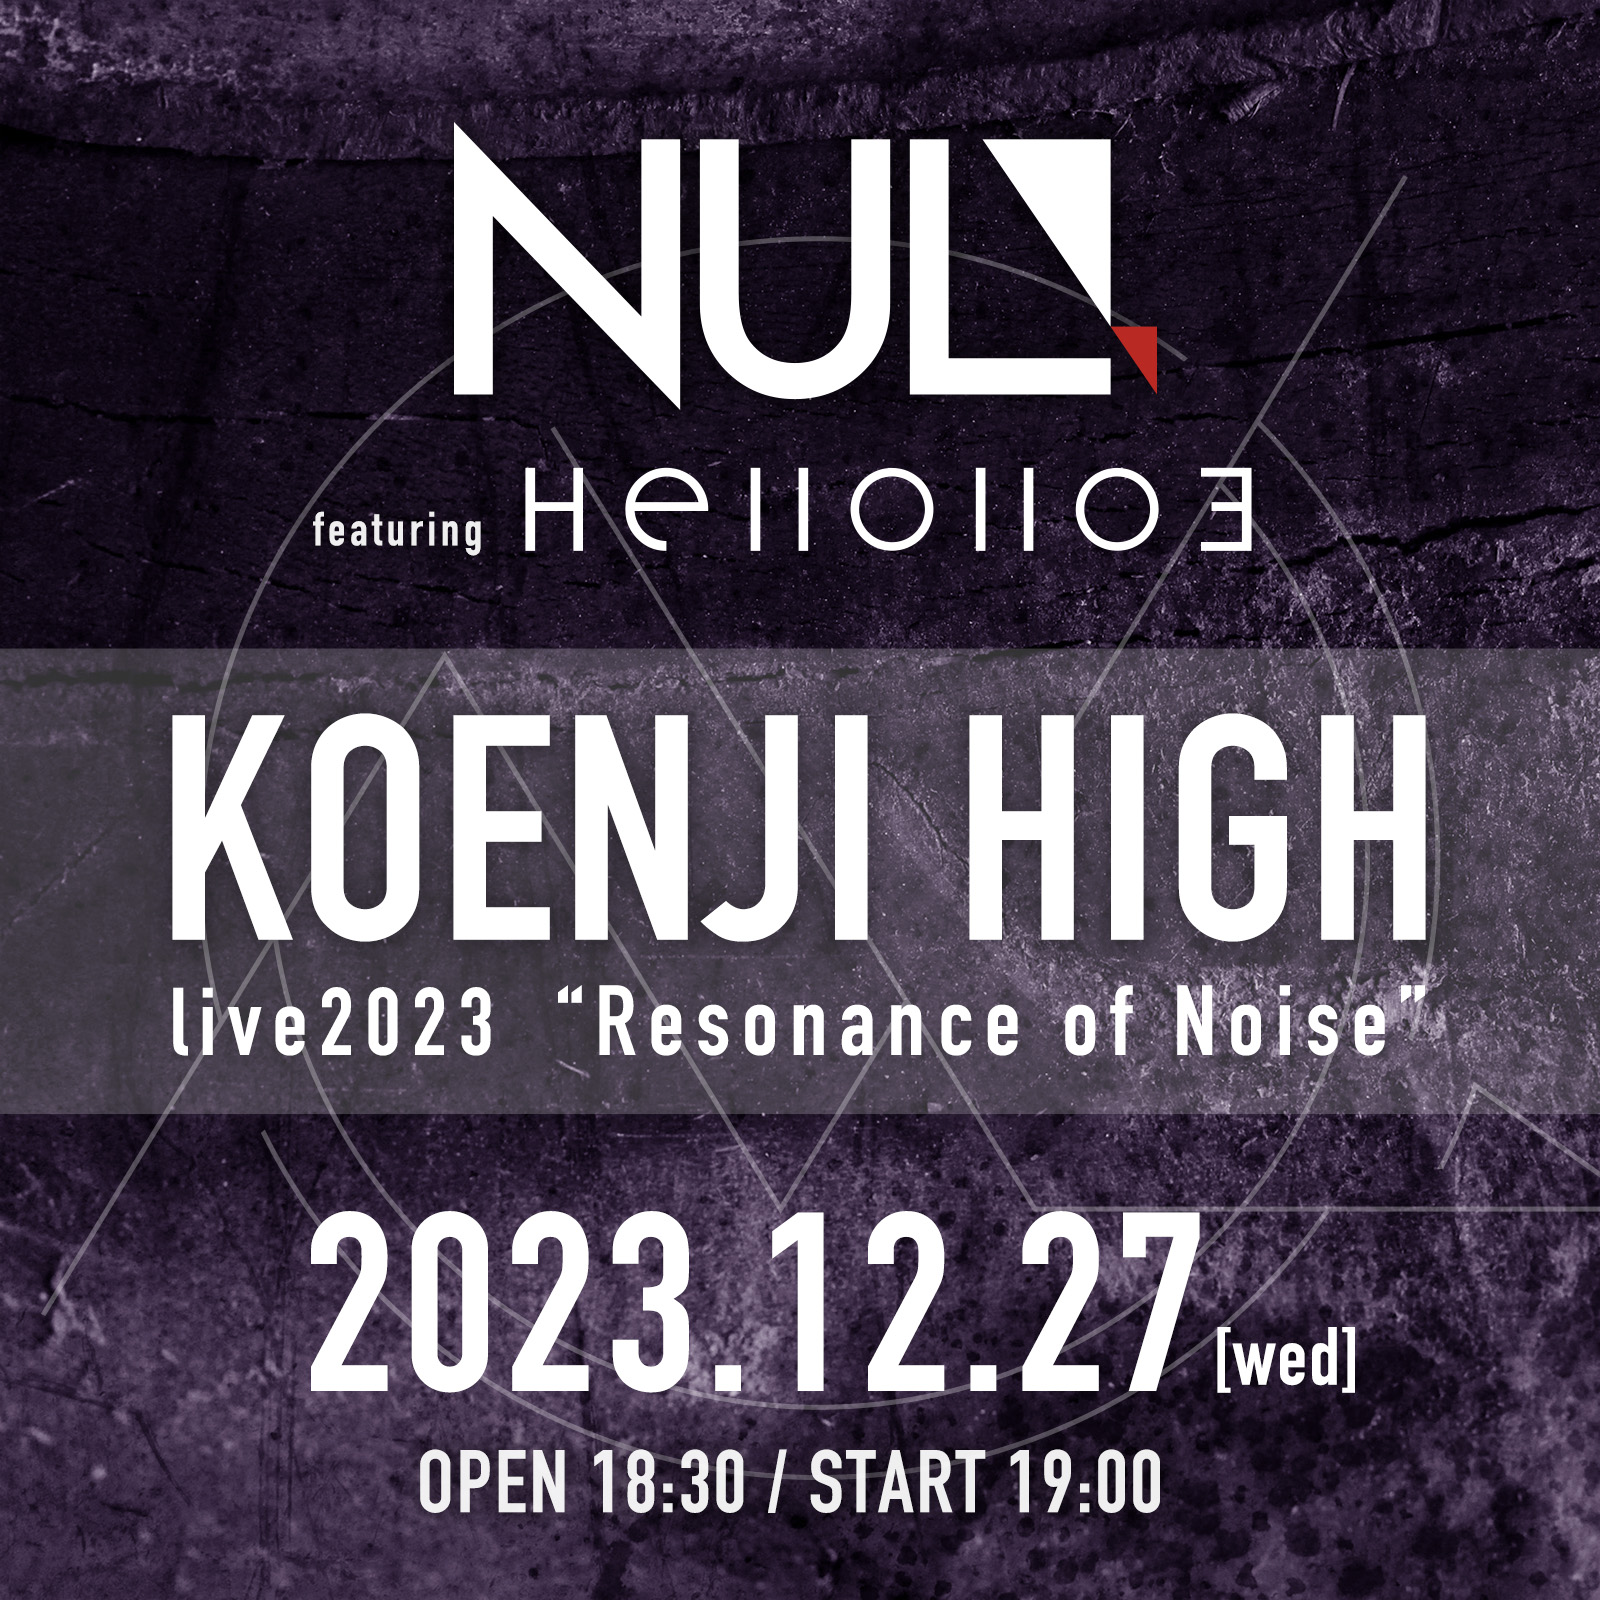 NUL. Live 2023 "Resonance of Noise"